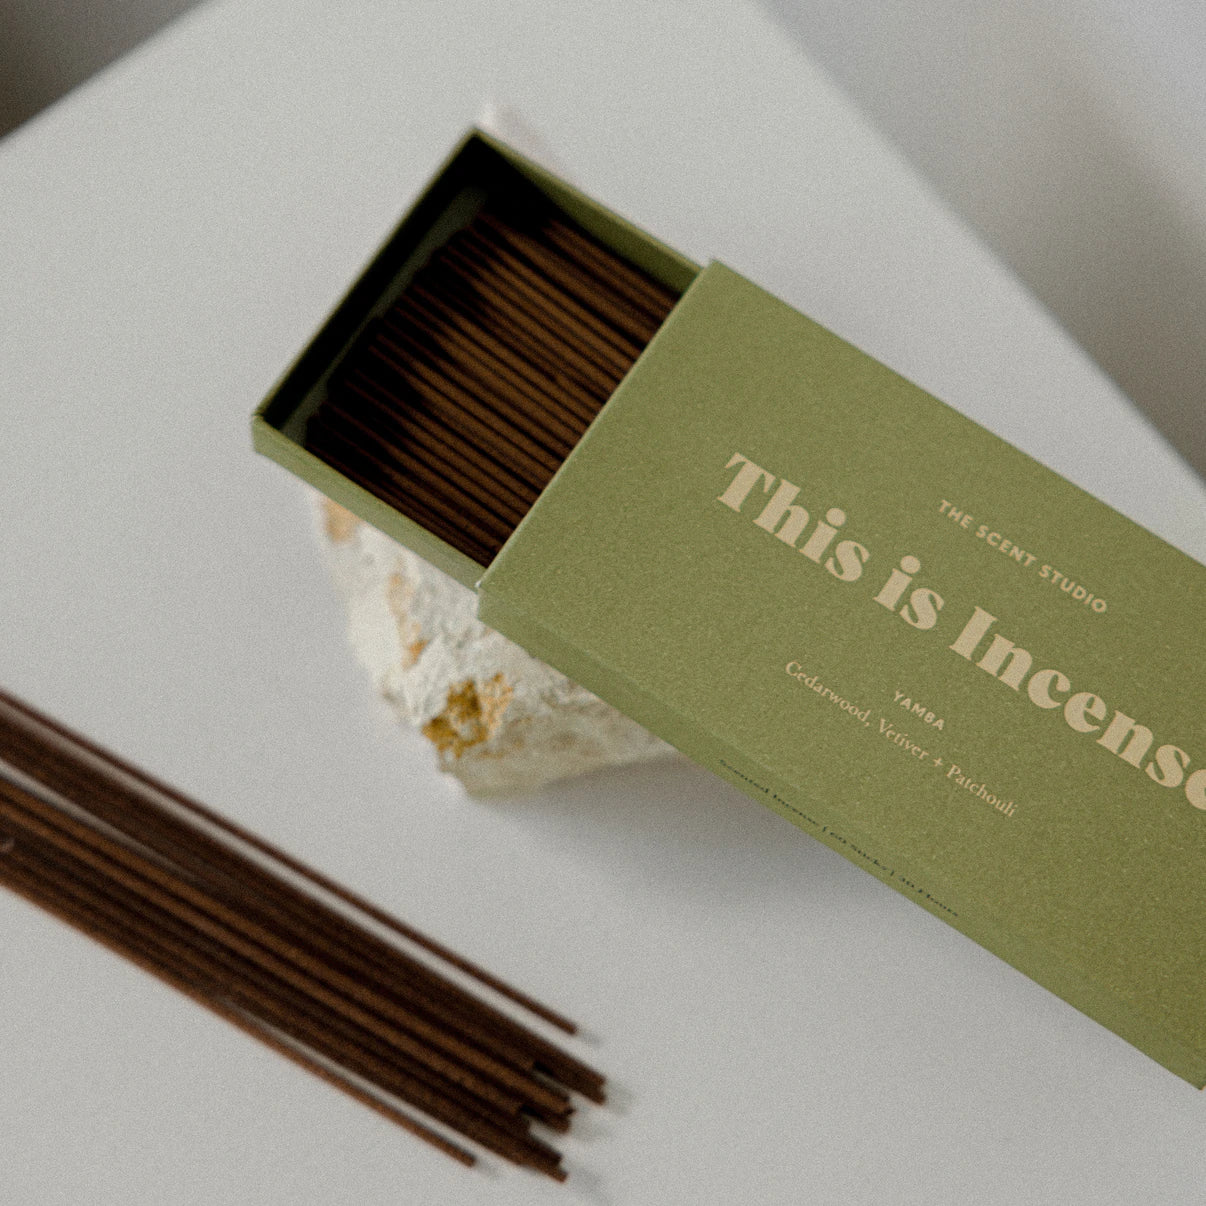 This is incense yamba | the ivy plant studio | incense | 